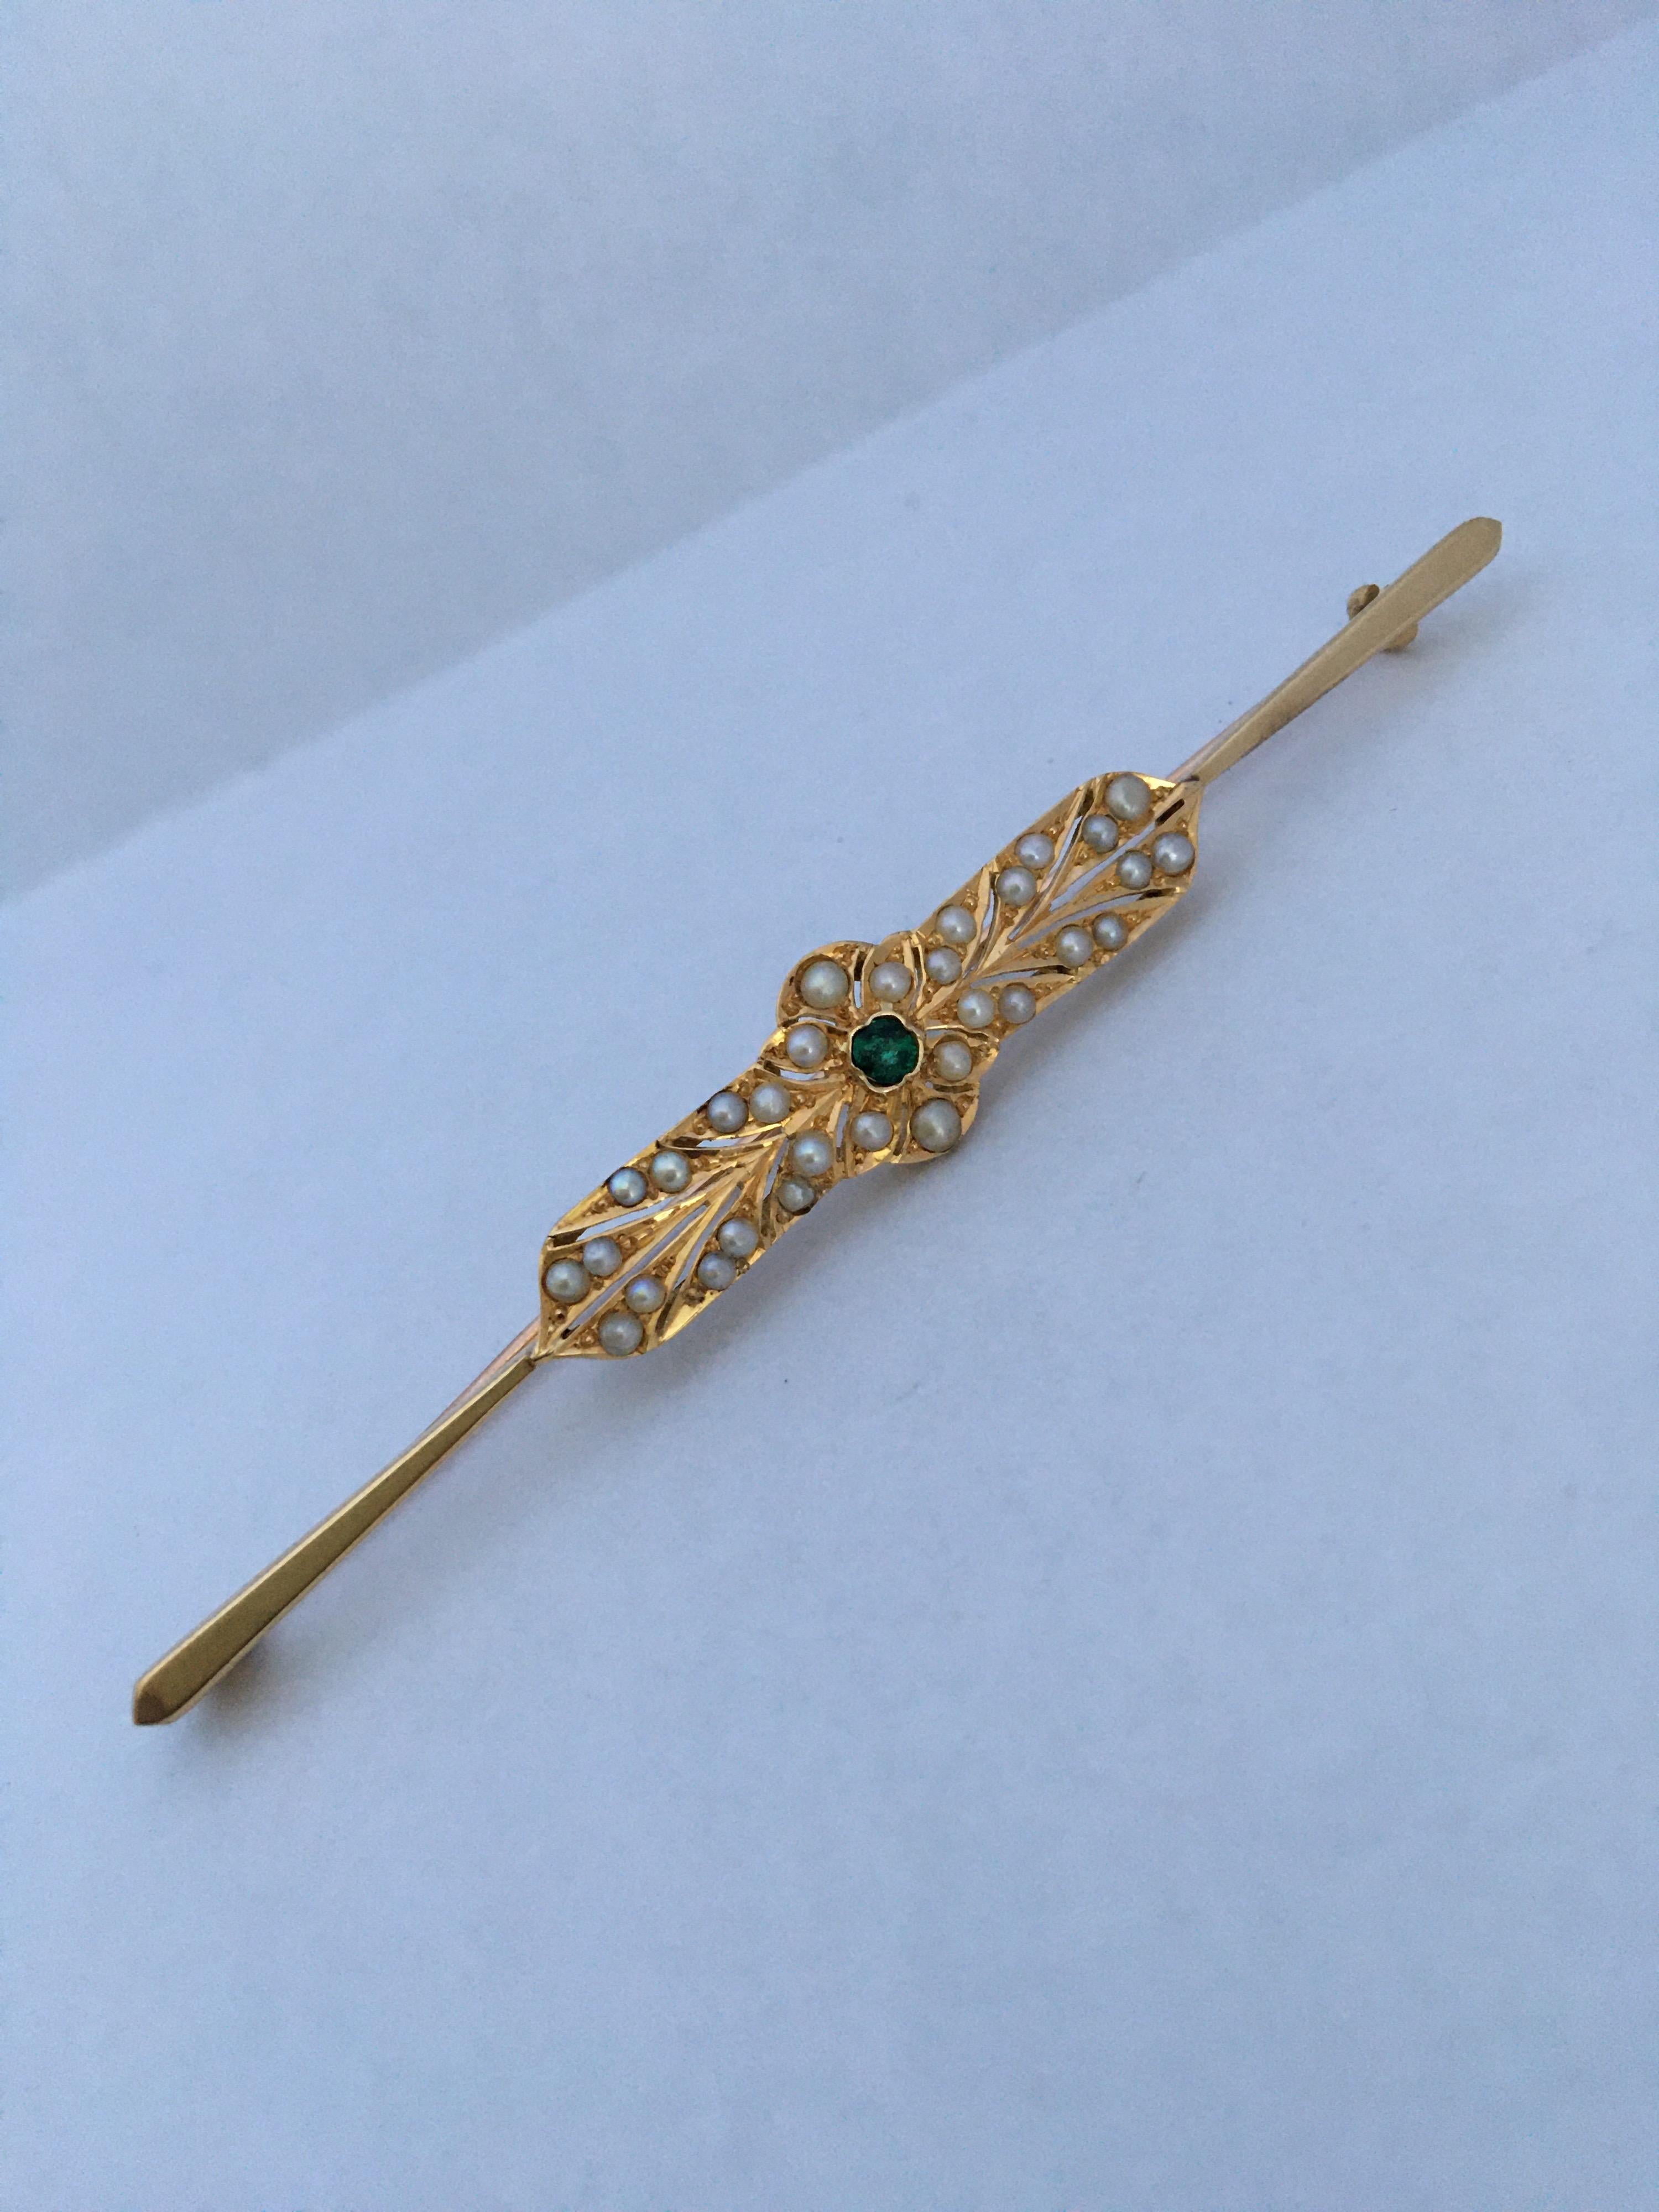 18 Karat Gold Victorian Brooch / Pin with Seeded Pear and Emerald For Sale 2